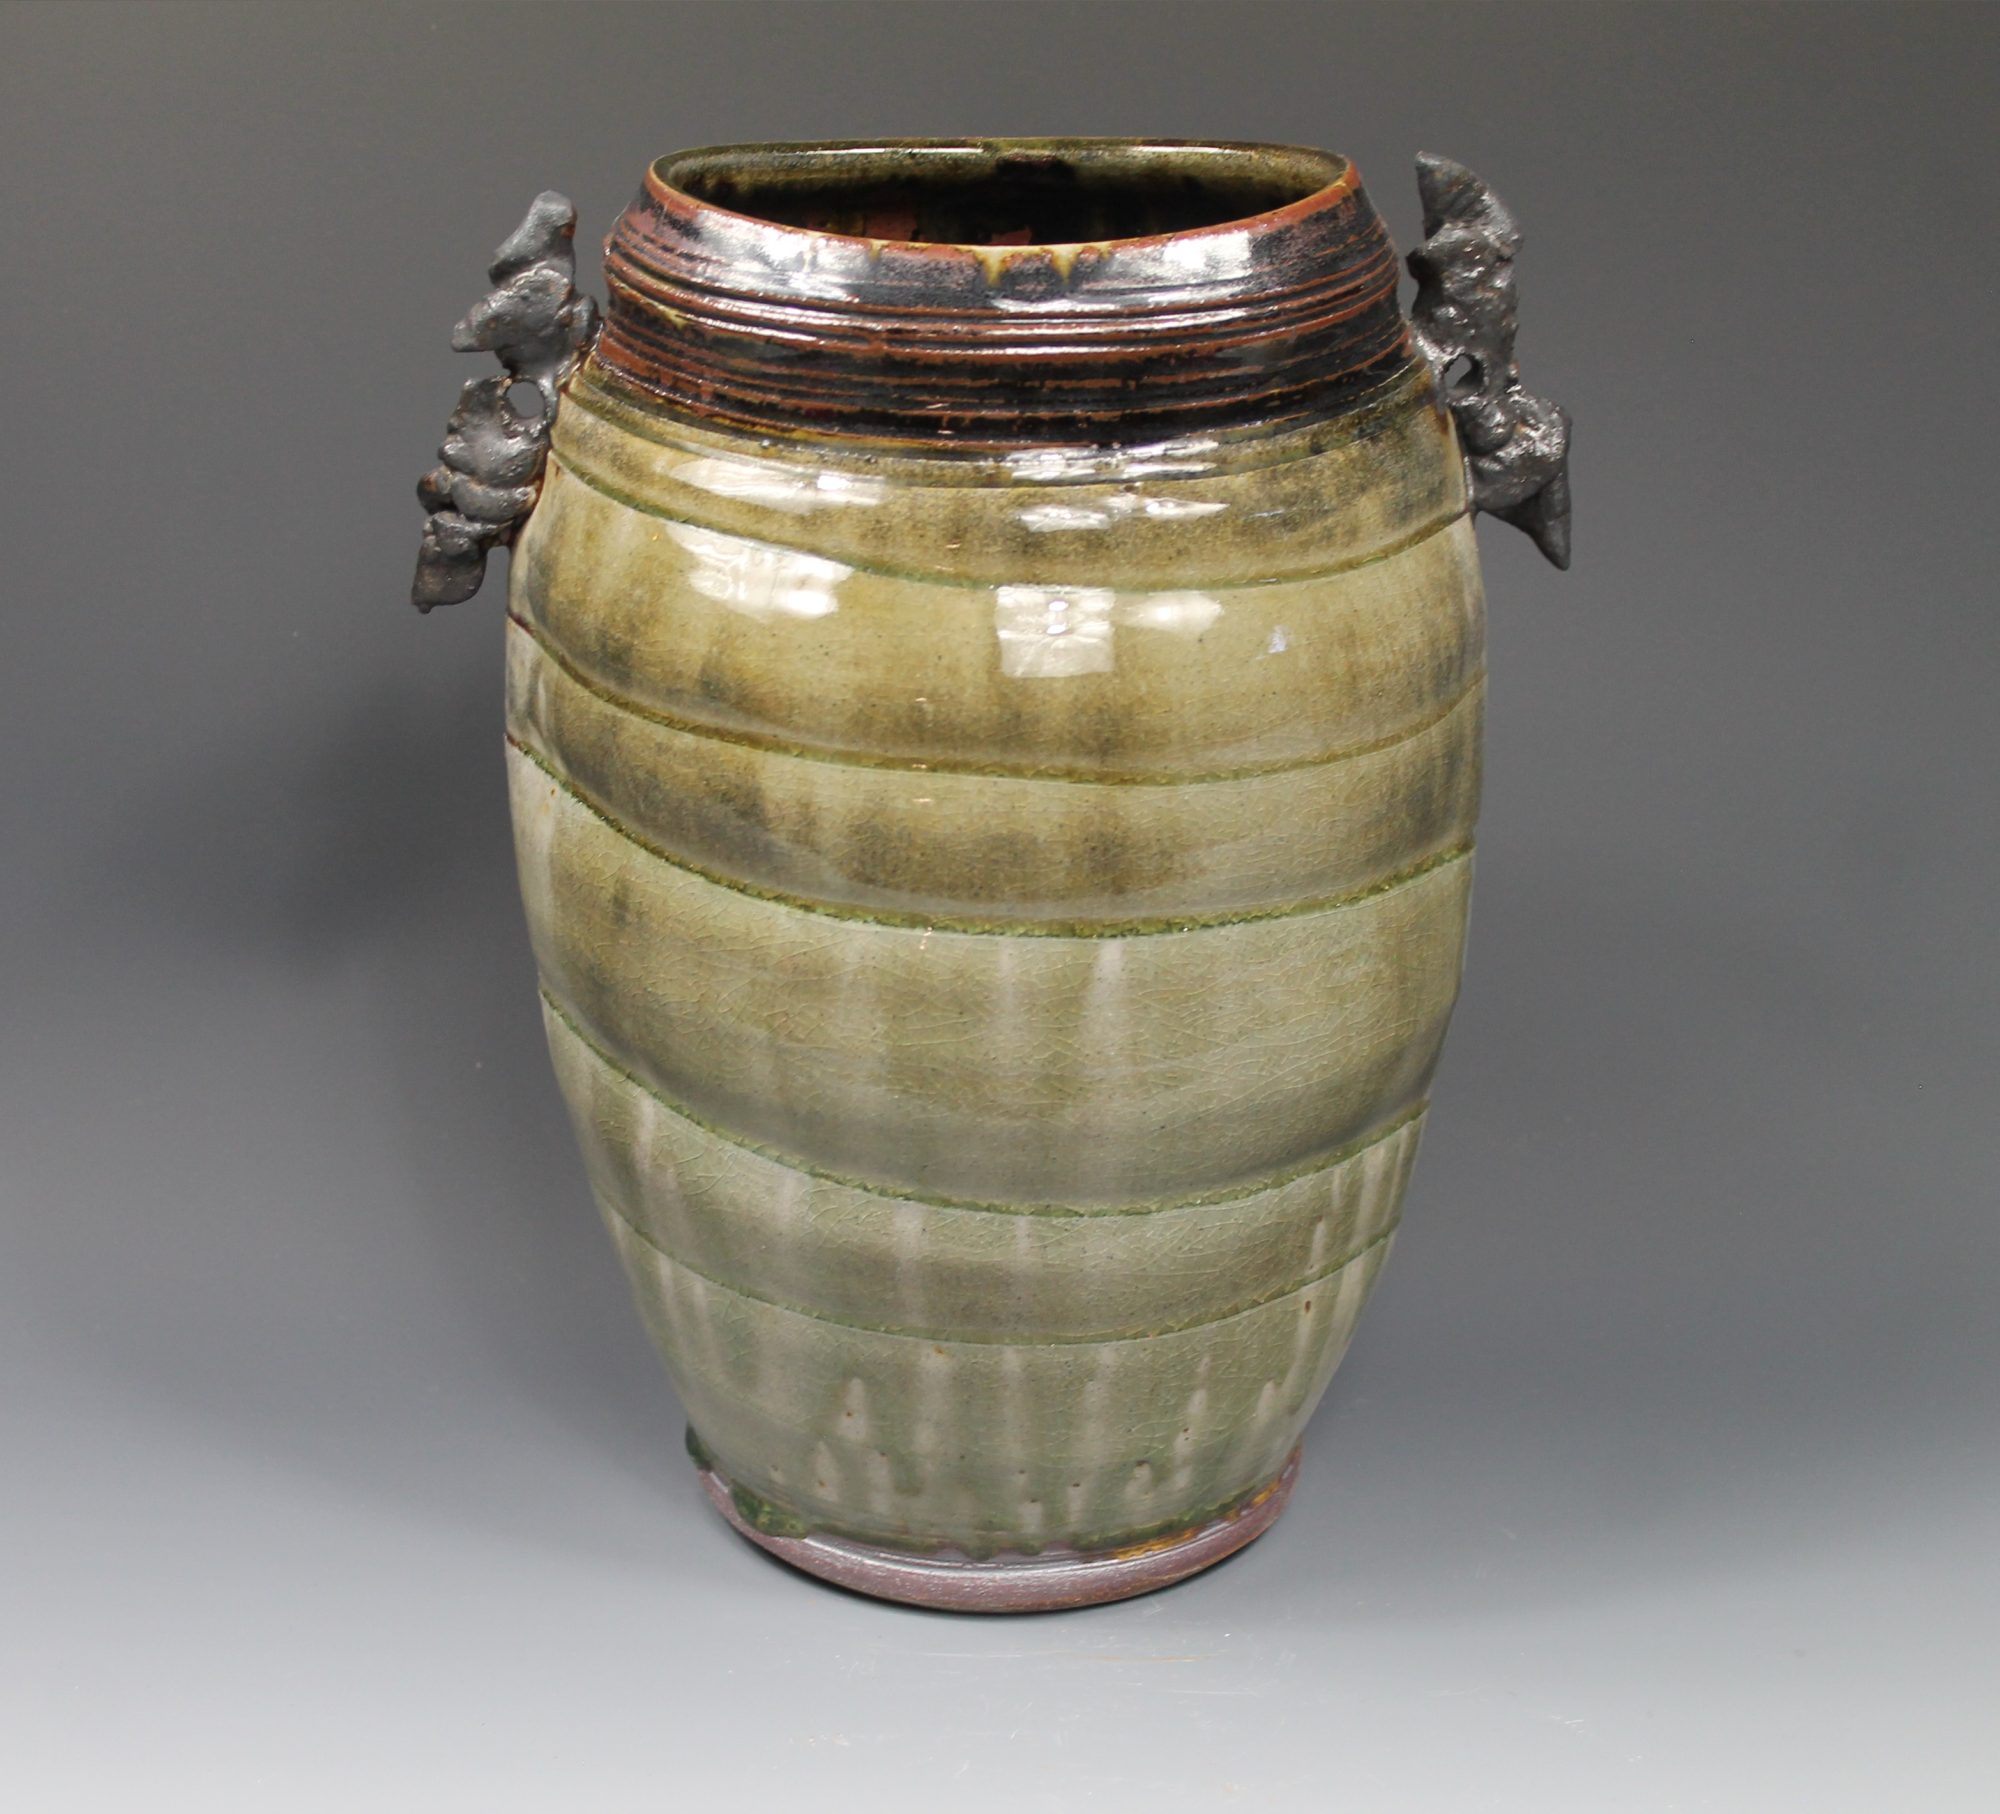 Vessels: A Journey in Clay by Walford Campbell